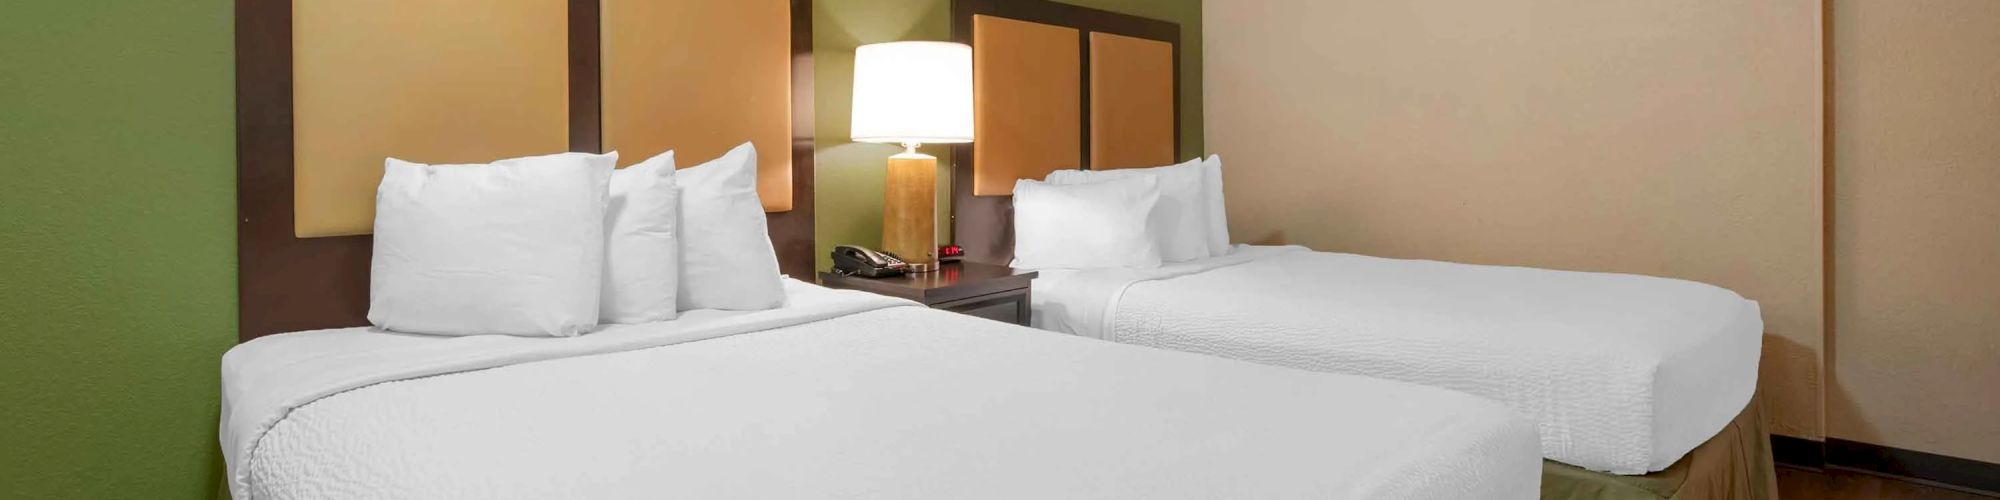 The image shows a hotel room with two neatly made beds, a nightstand with a lamp between them, green and beige walls, and wooden flooring.